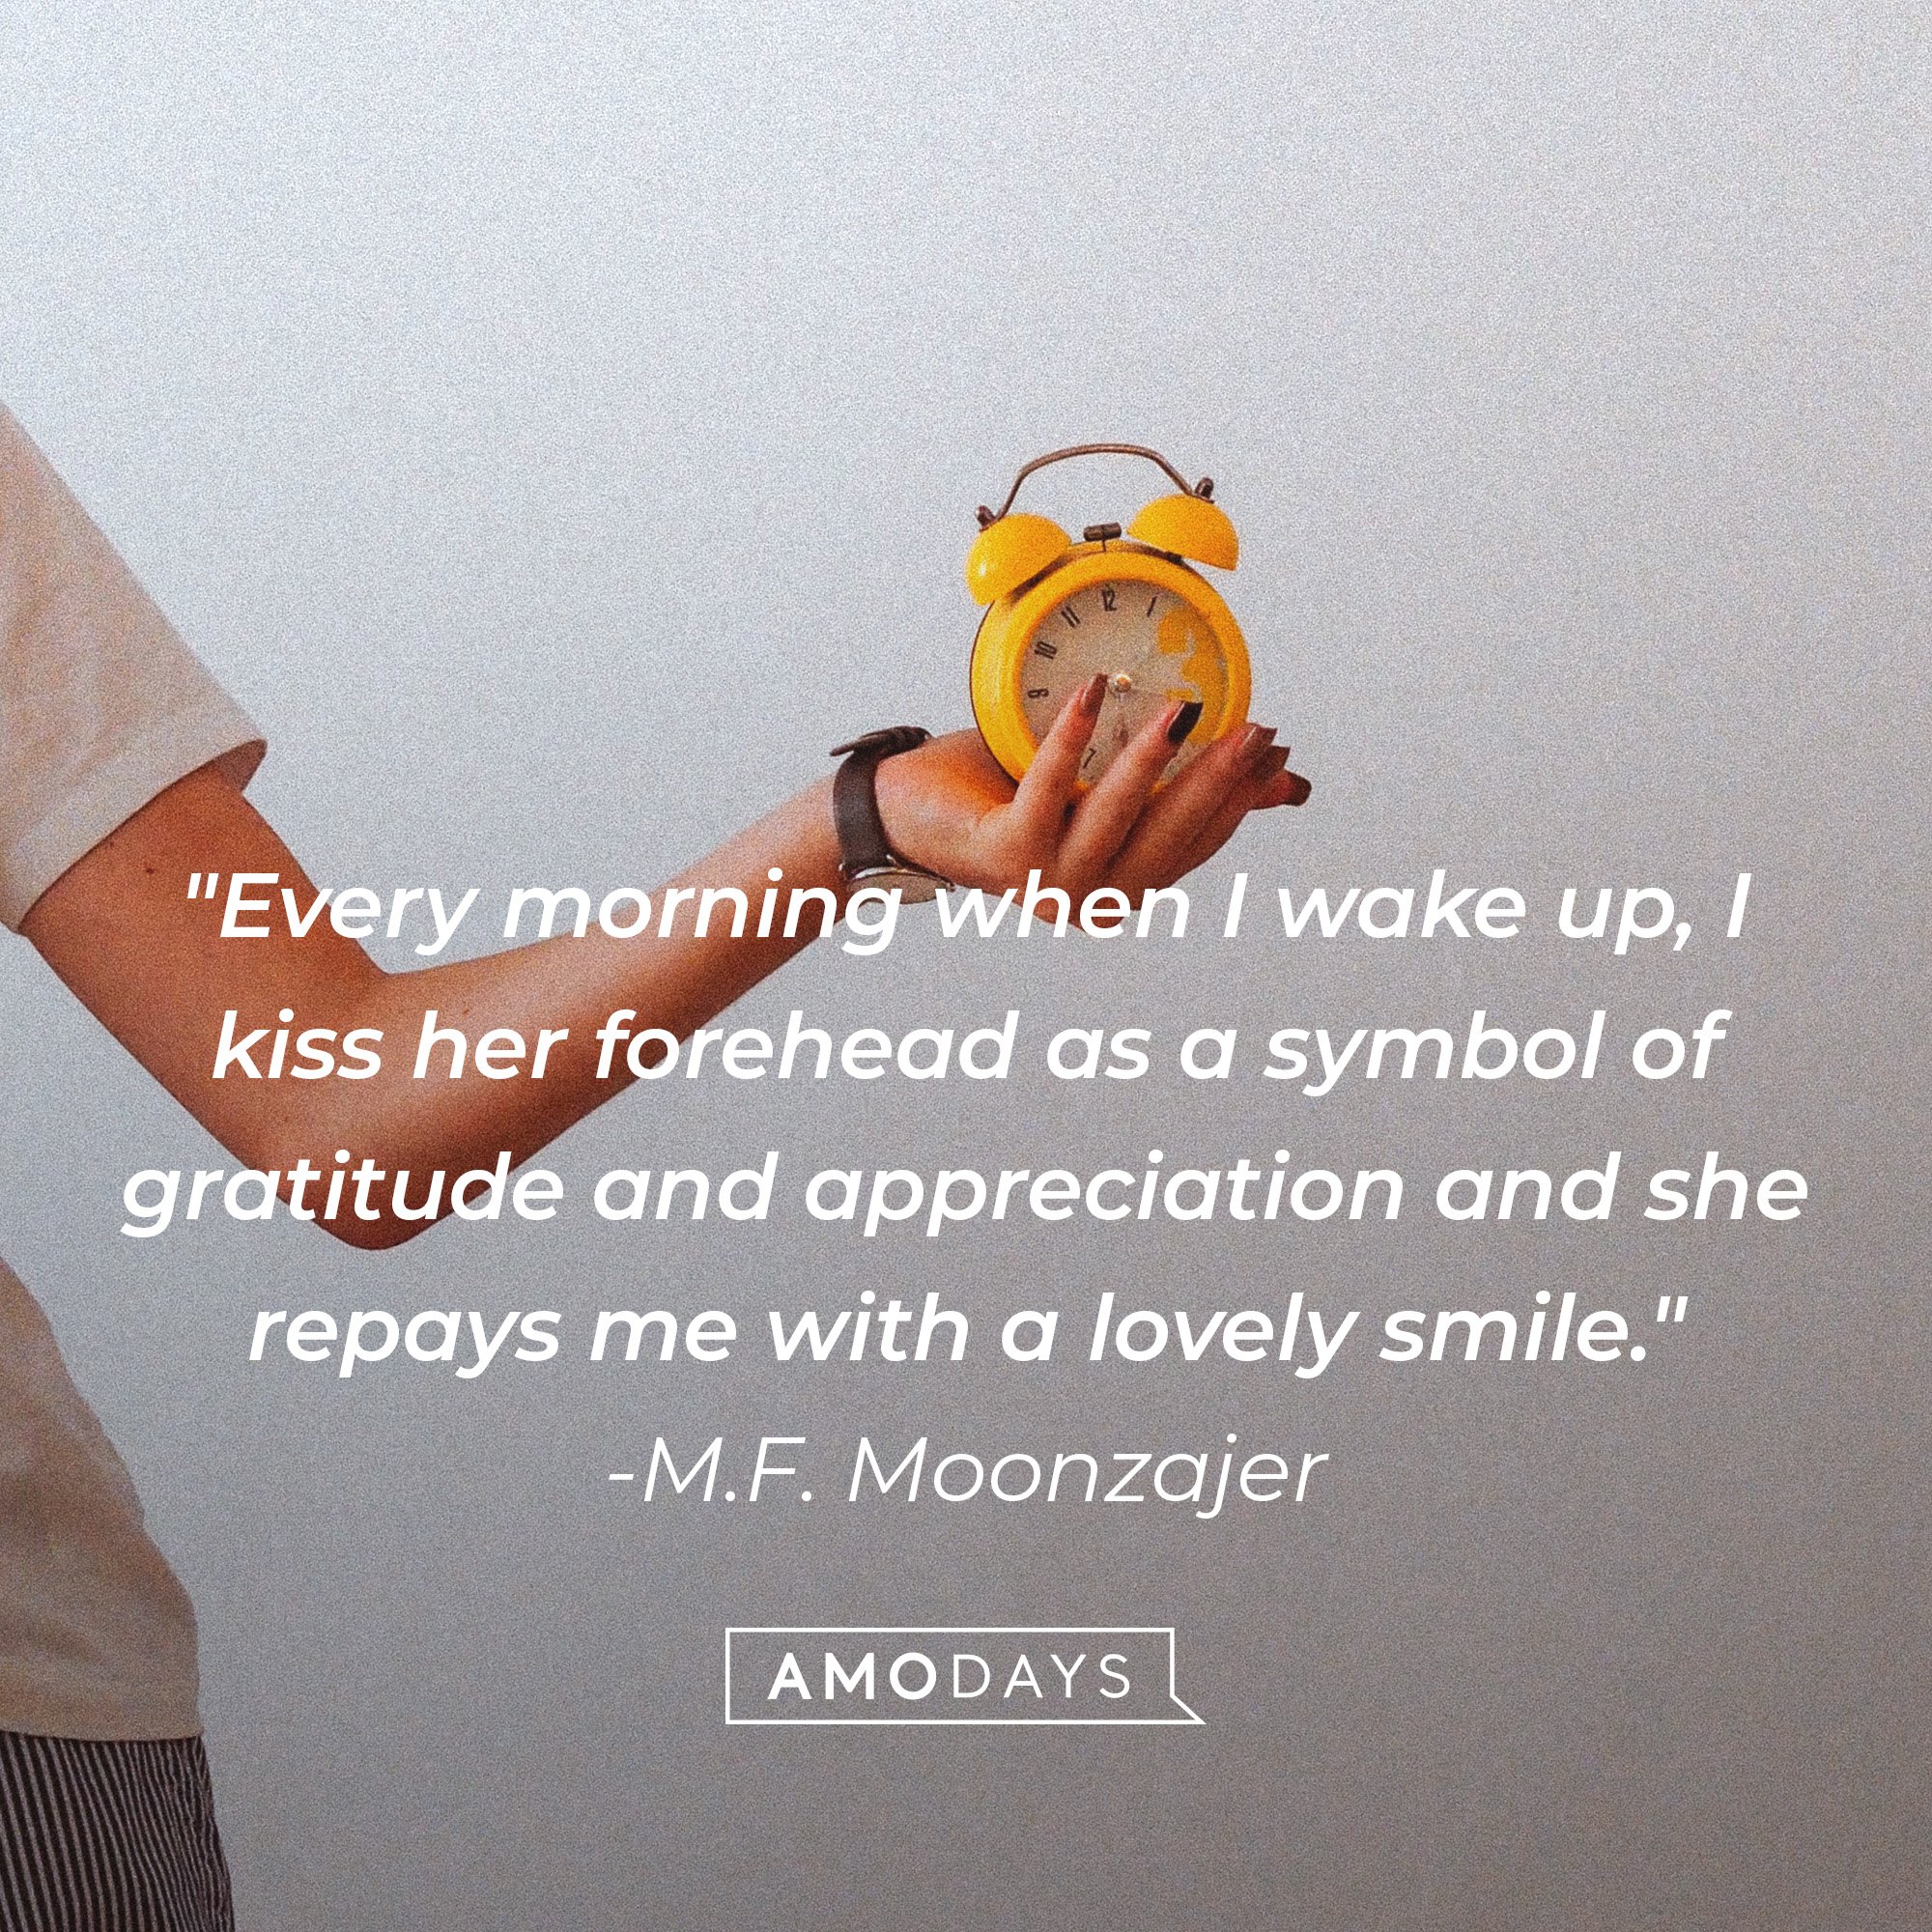 M.F. Moonzaje's quote: "Every morning when I wake up, I kiss her forehead as a symbol of gratitude and appreciation and she repays me with a lovely smile." | Image: AmoDays 